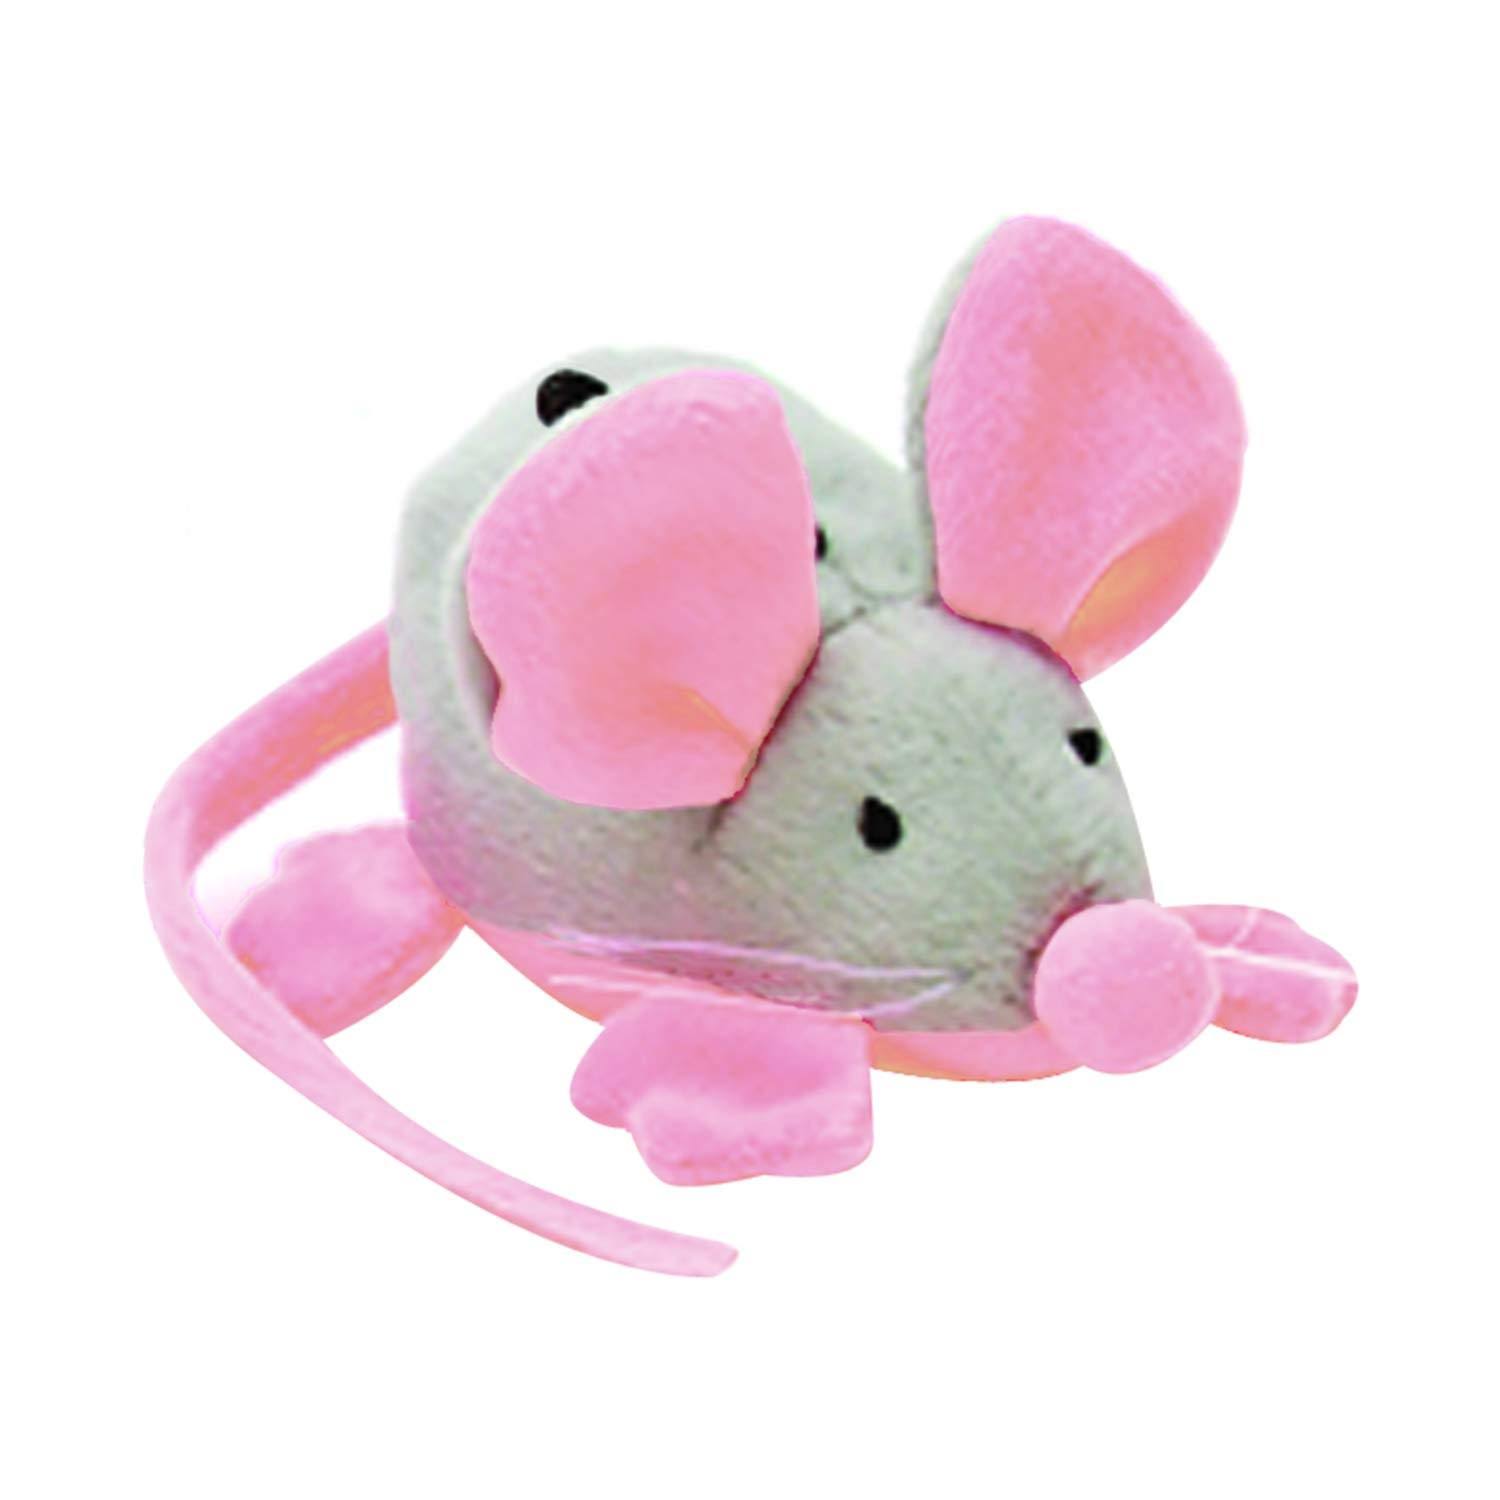 Spot Ethical Rattle Clatter Catnip Mouse Cat Toy - Colors Vary